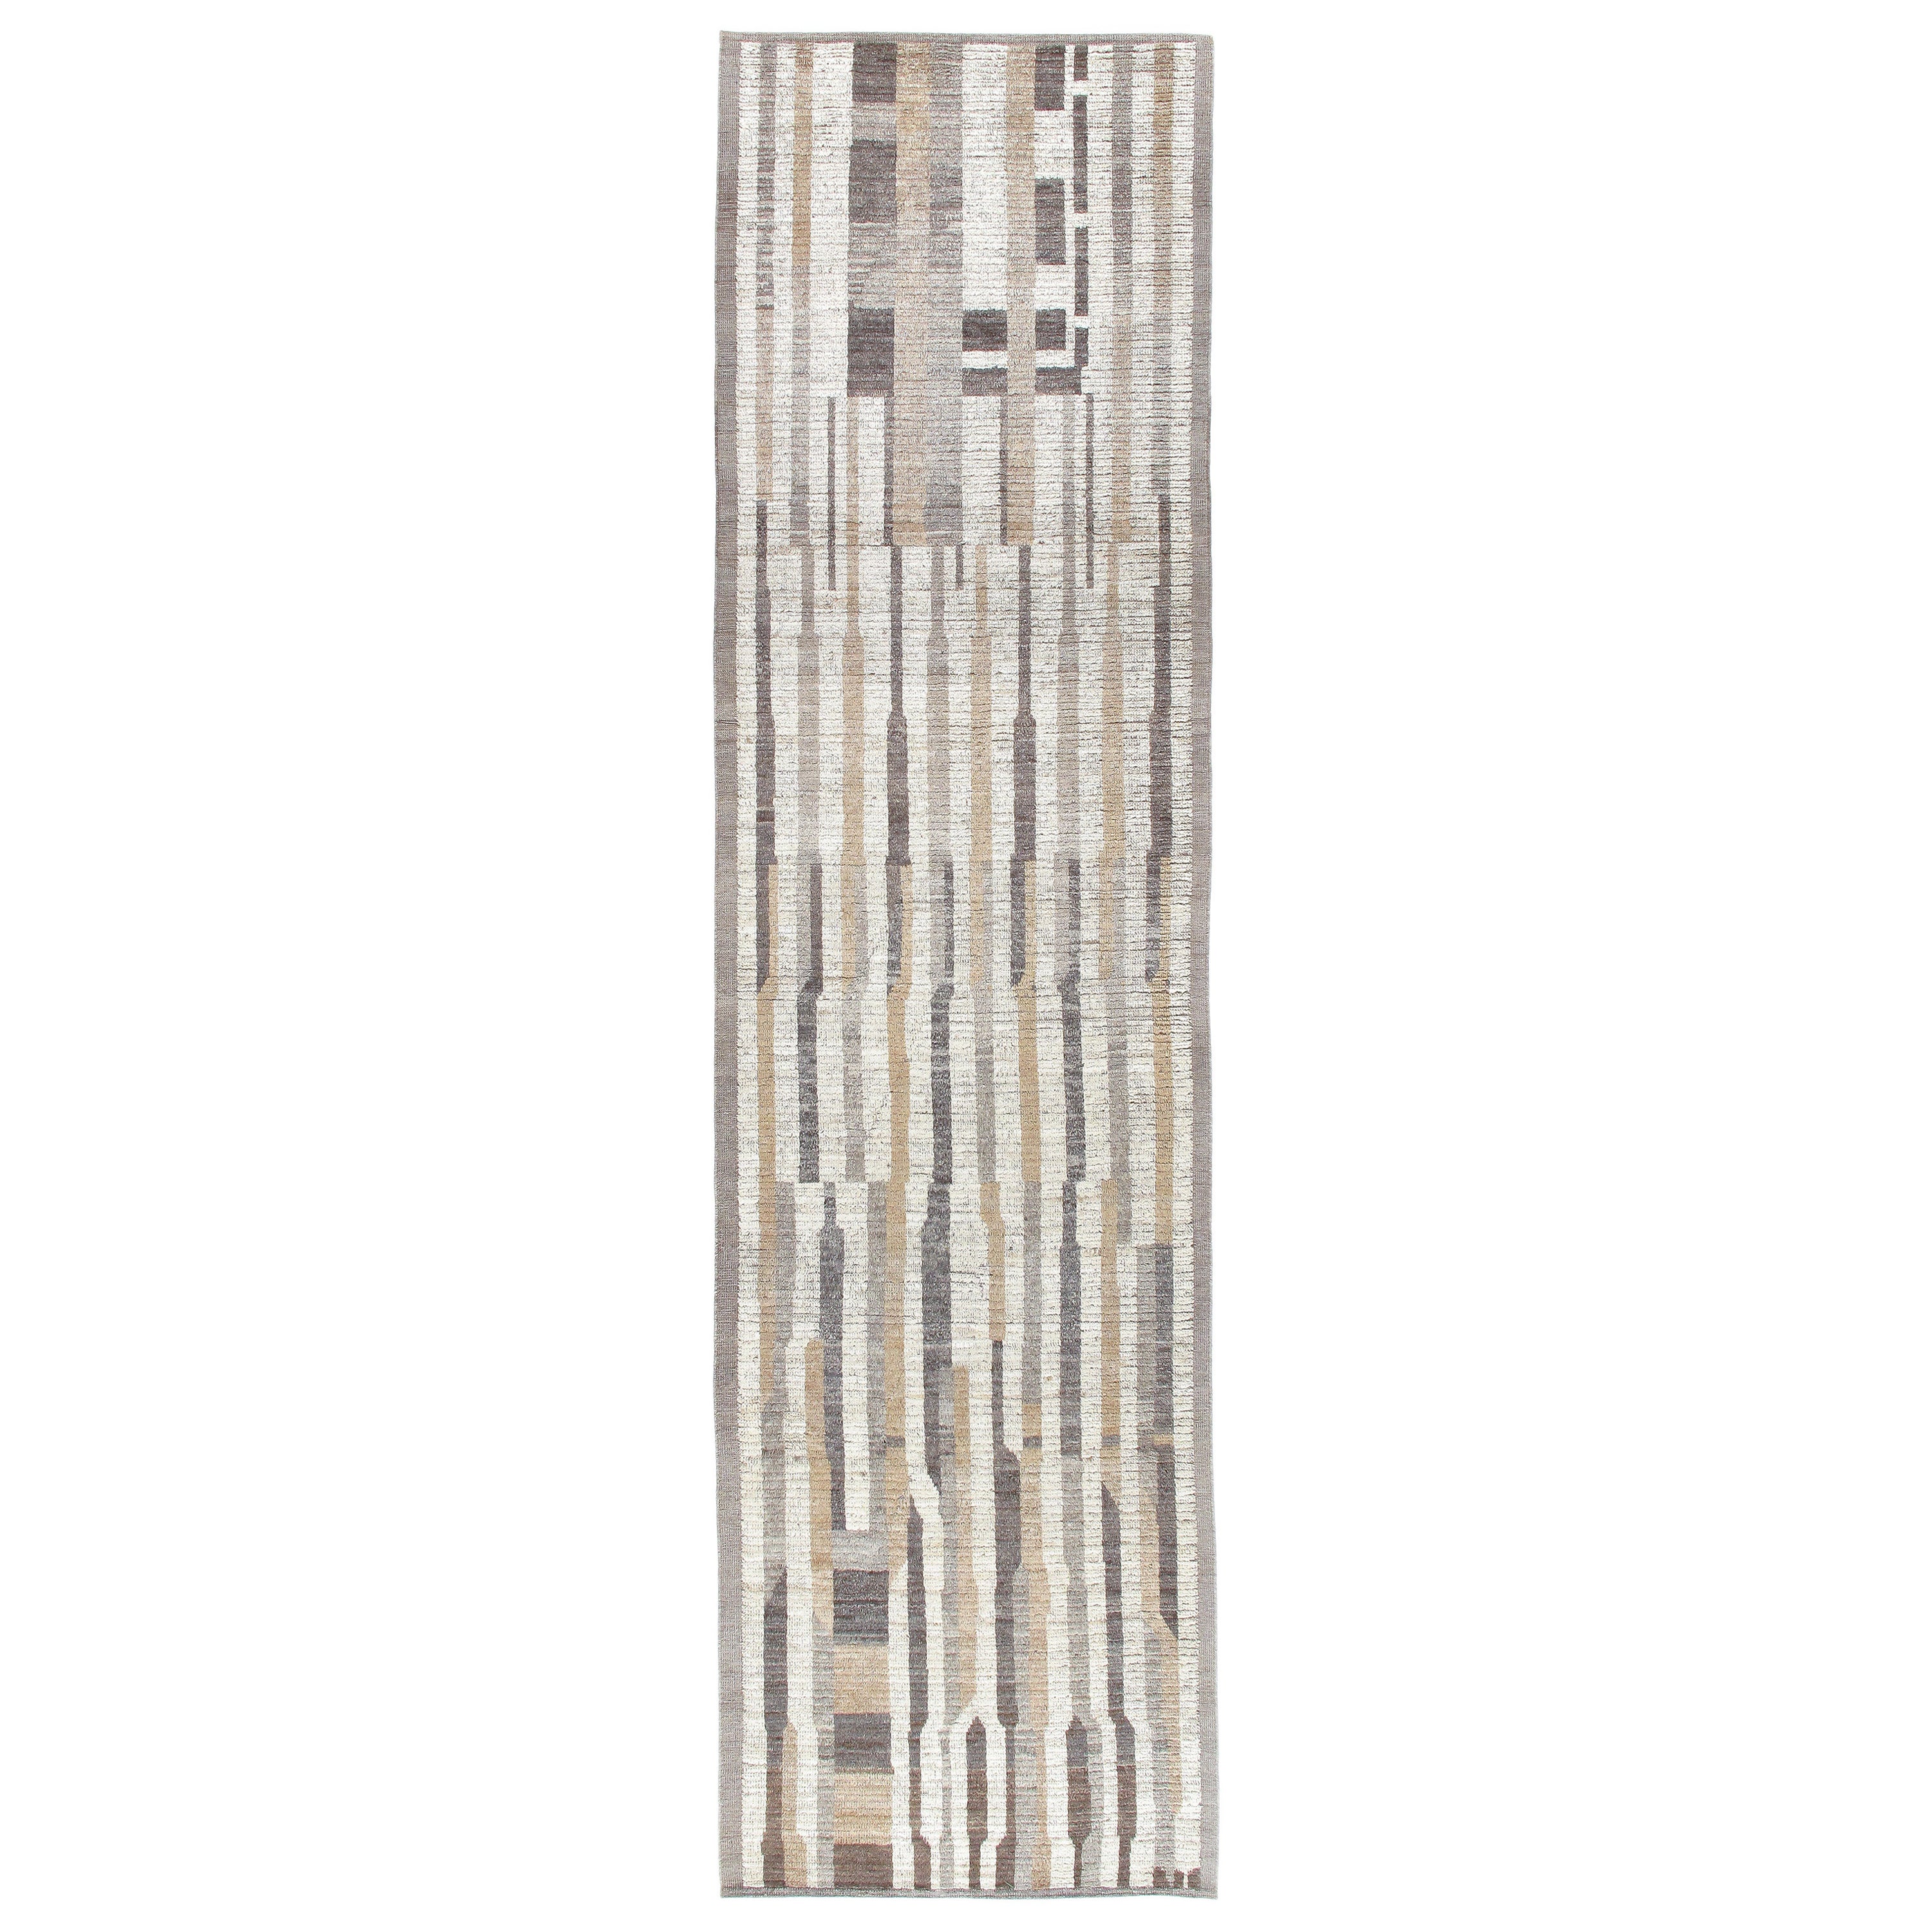 Contemporary Tribal Style Runner in Natural Color Tones For Sale